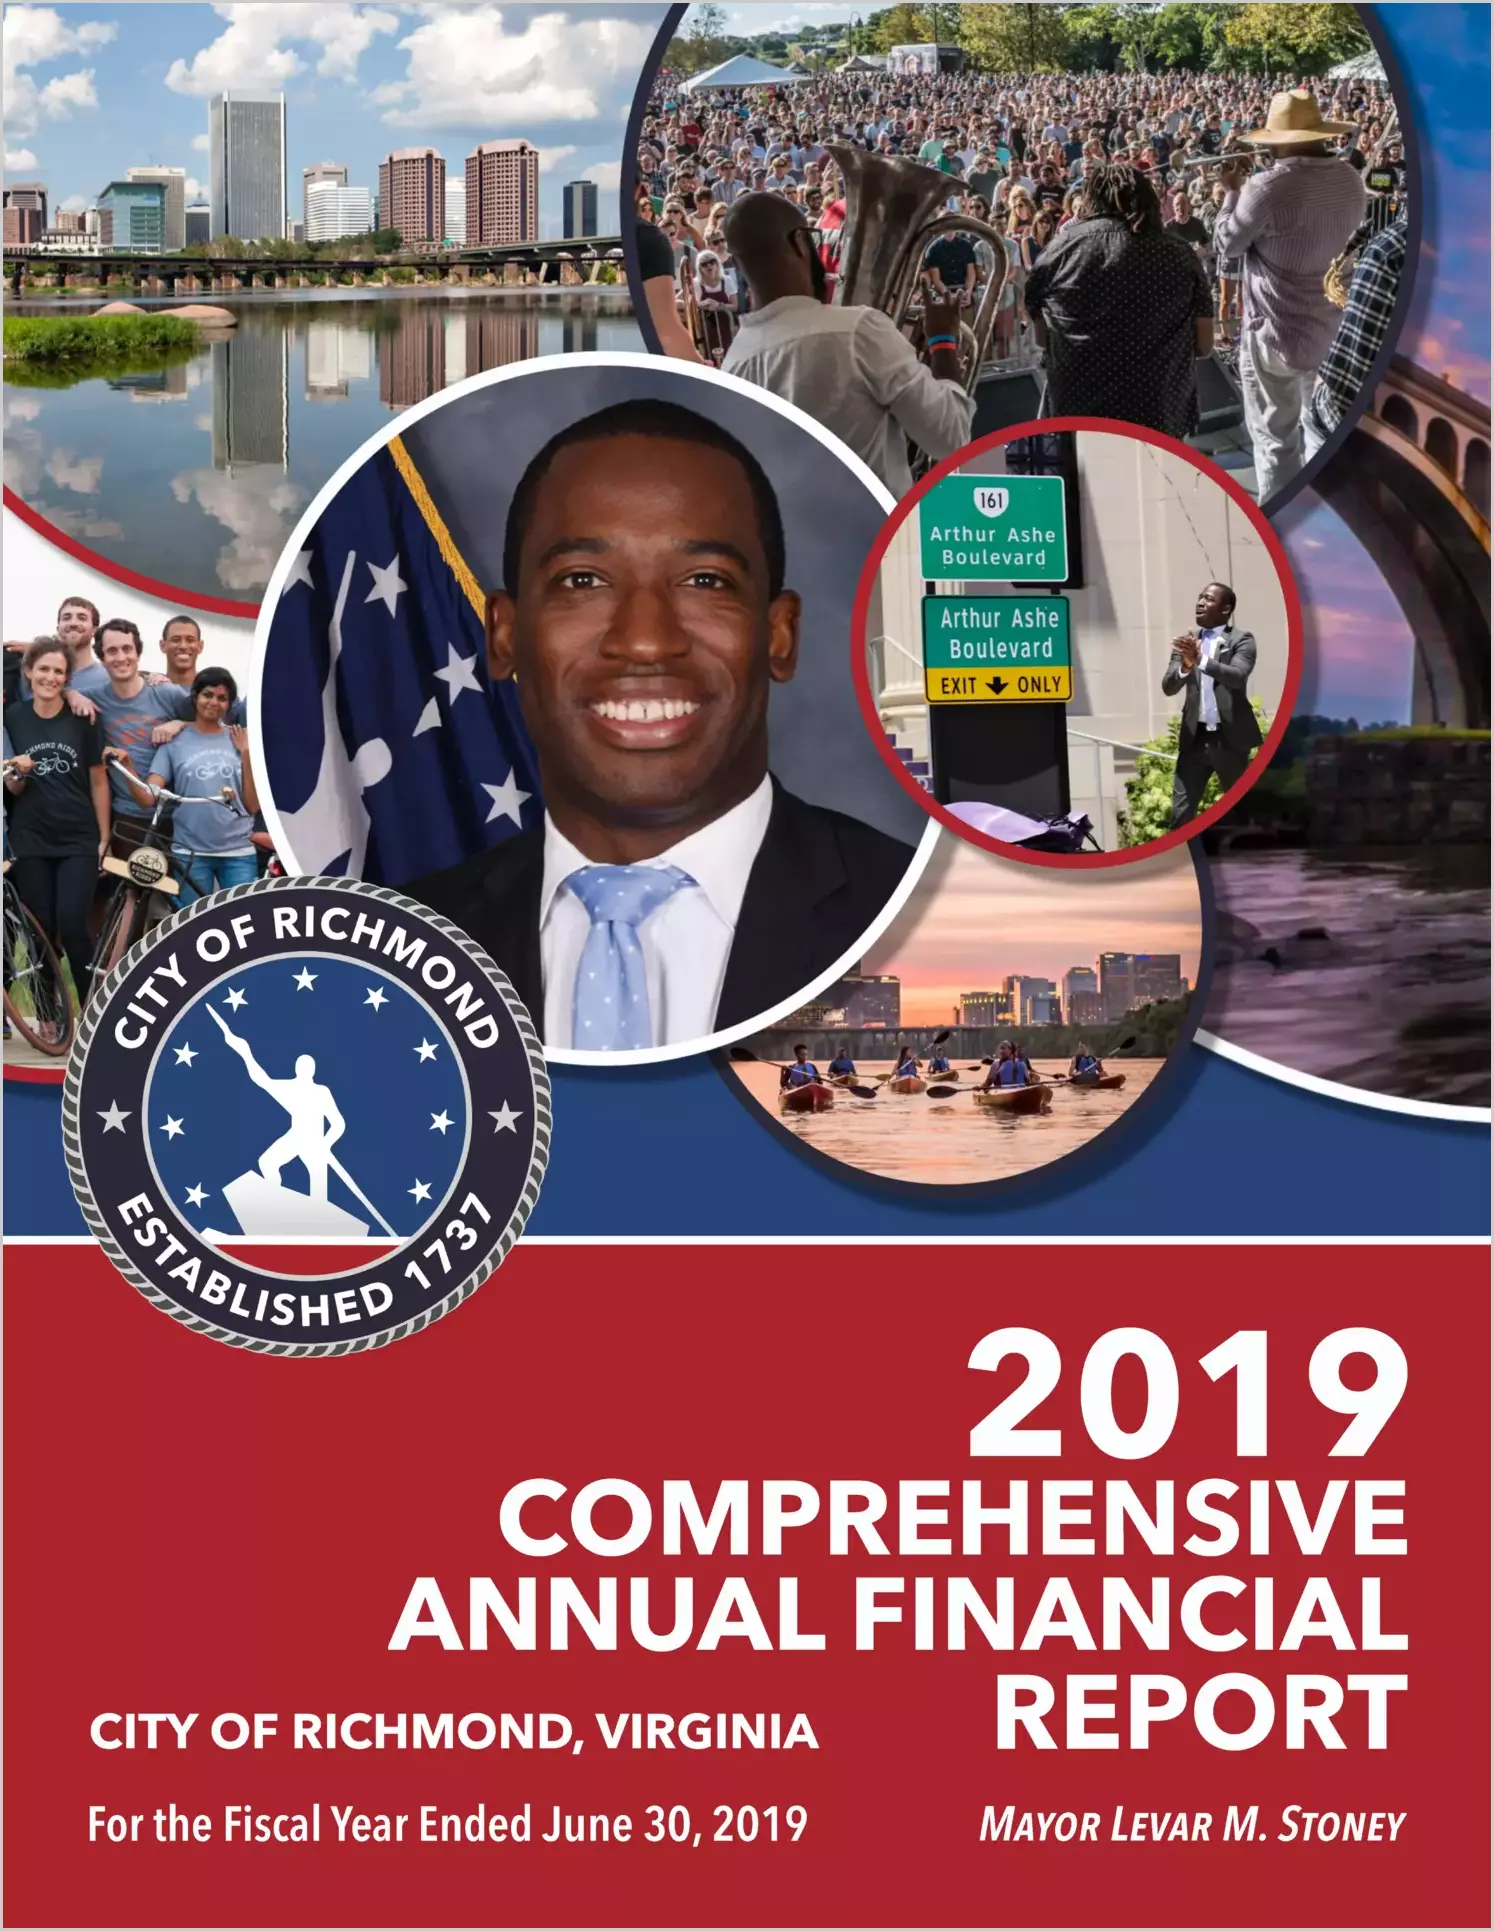 2019 Annual Financial Report for City of Richmond